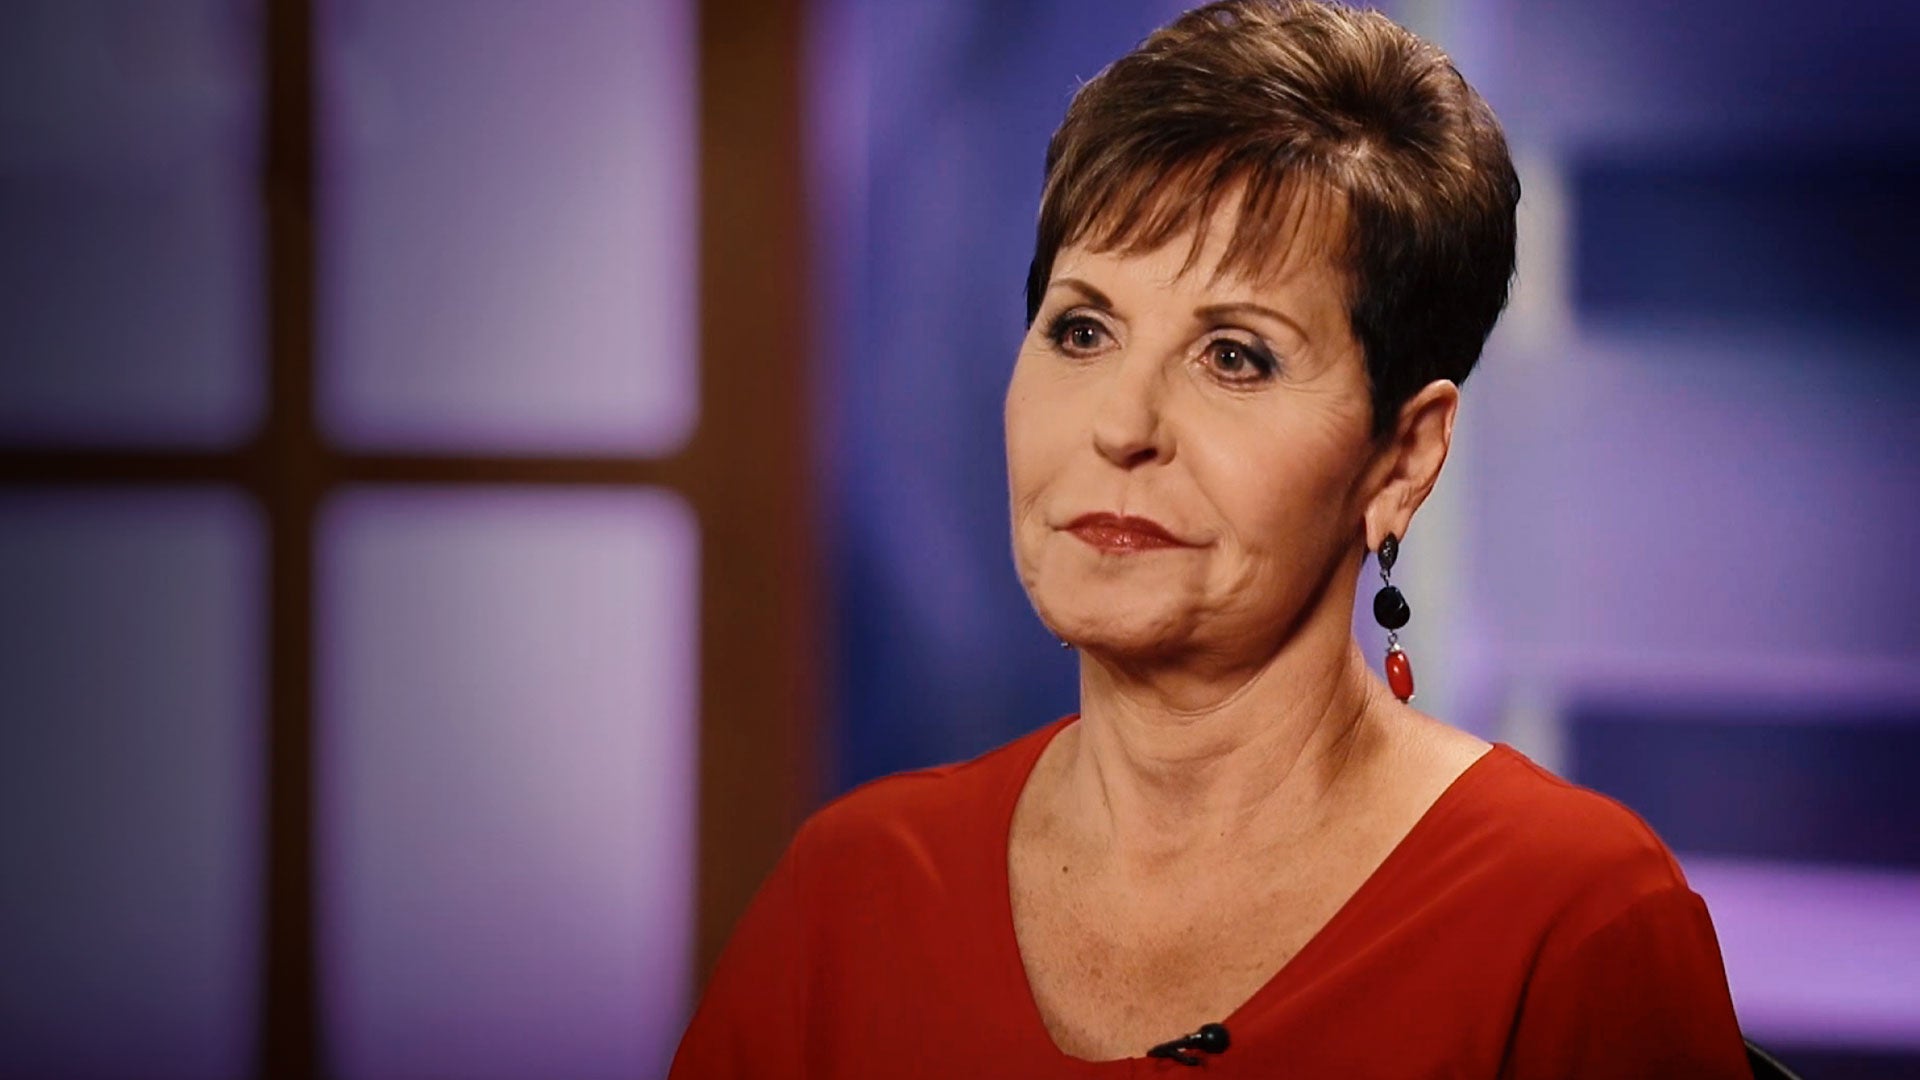 Trending Video Joyce Meyer Details Her Father's Abuse CBN News